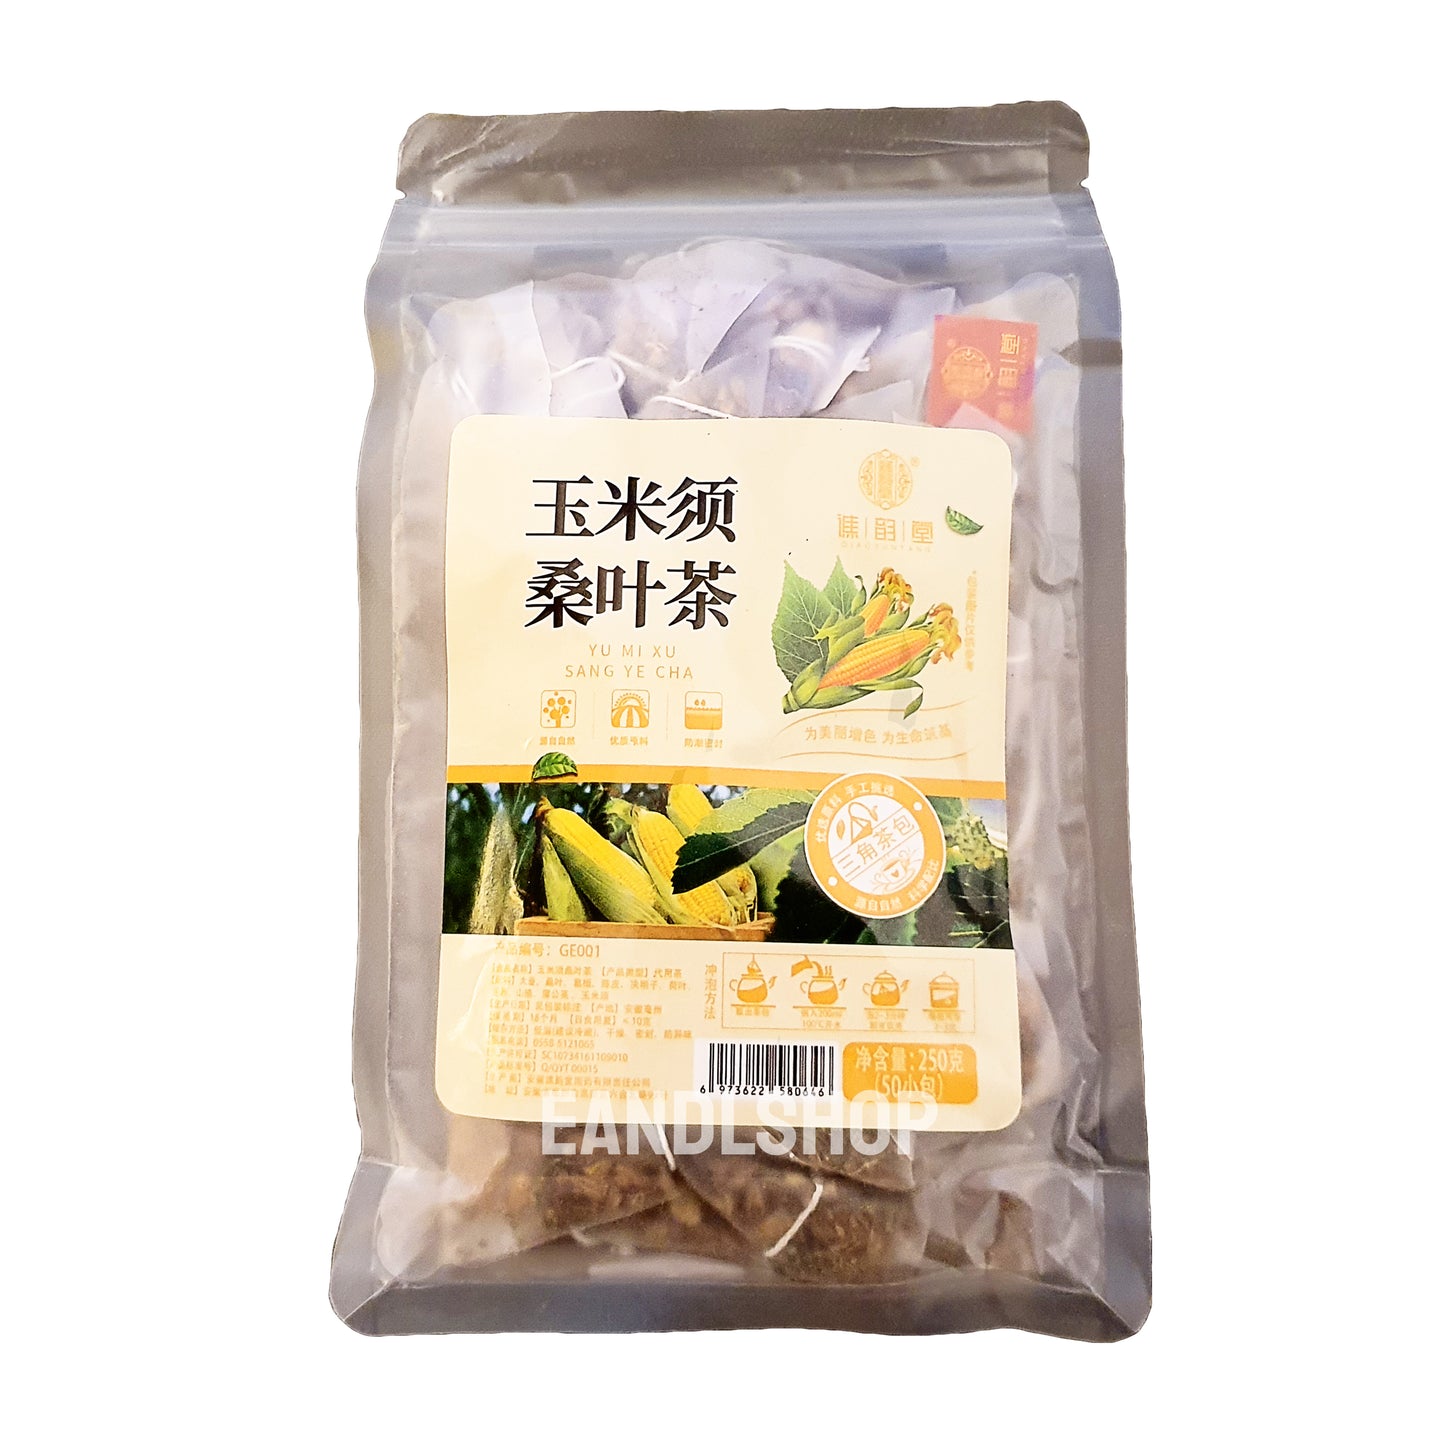 Corn Silk Mulberry Leaf Tea. Old-school biscuits, modern snacks (chips, crackers), cakes, gummies, plums, dried fruits, nuts, herbal tea – available at www.EANDLSHOP.com